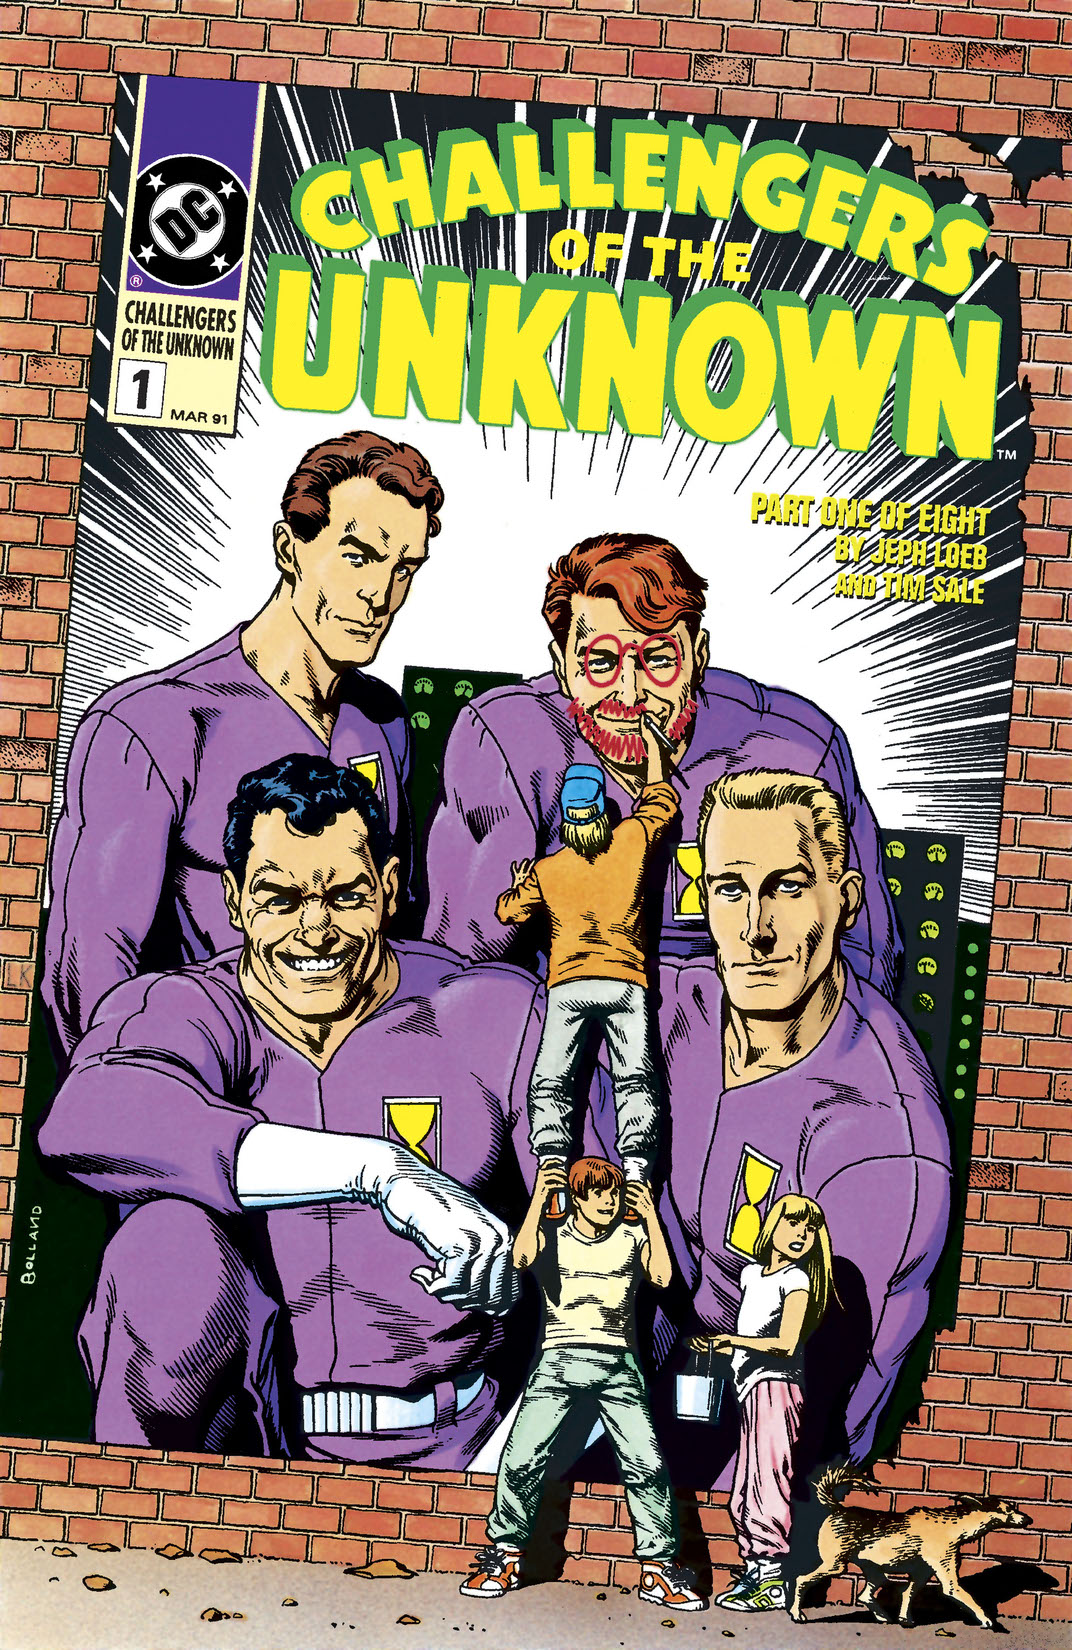 Challengers of the Unknown (1991-) #1 preview images